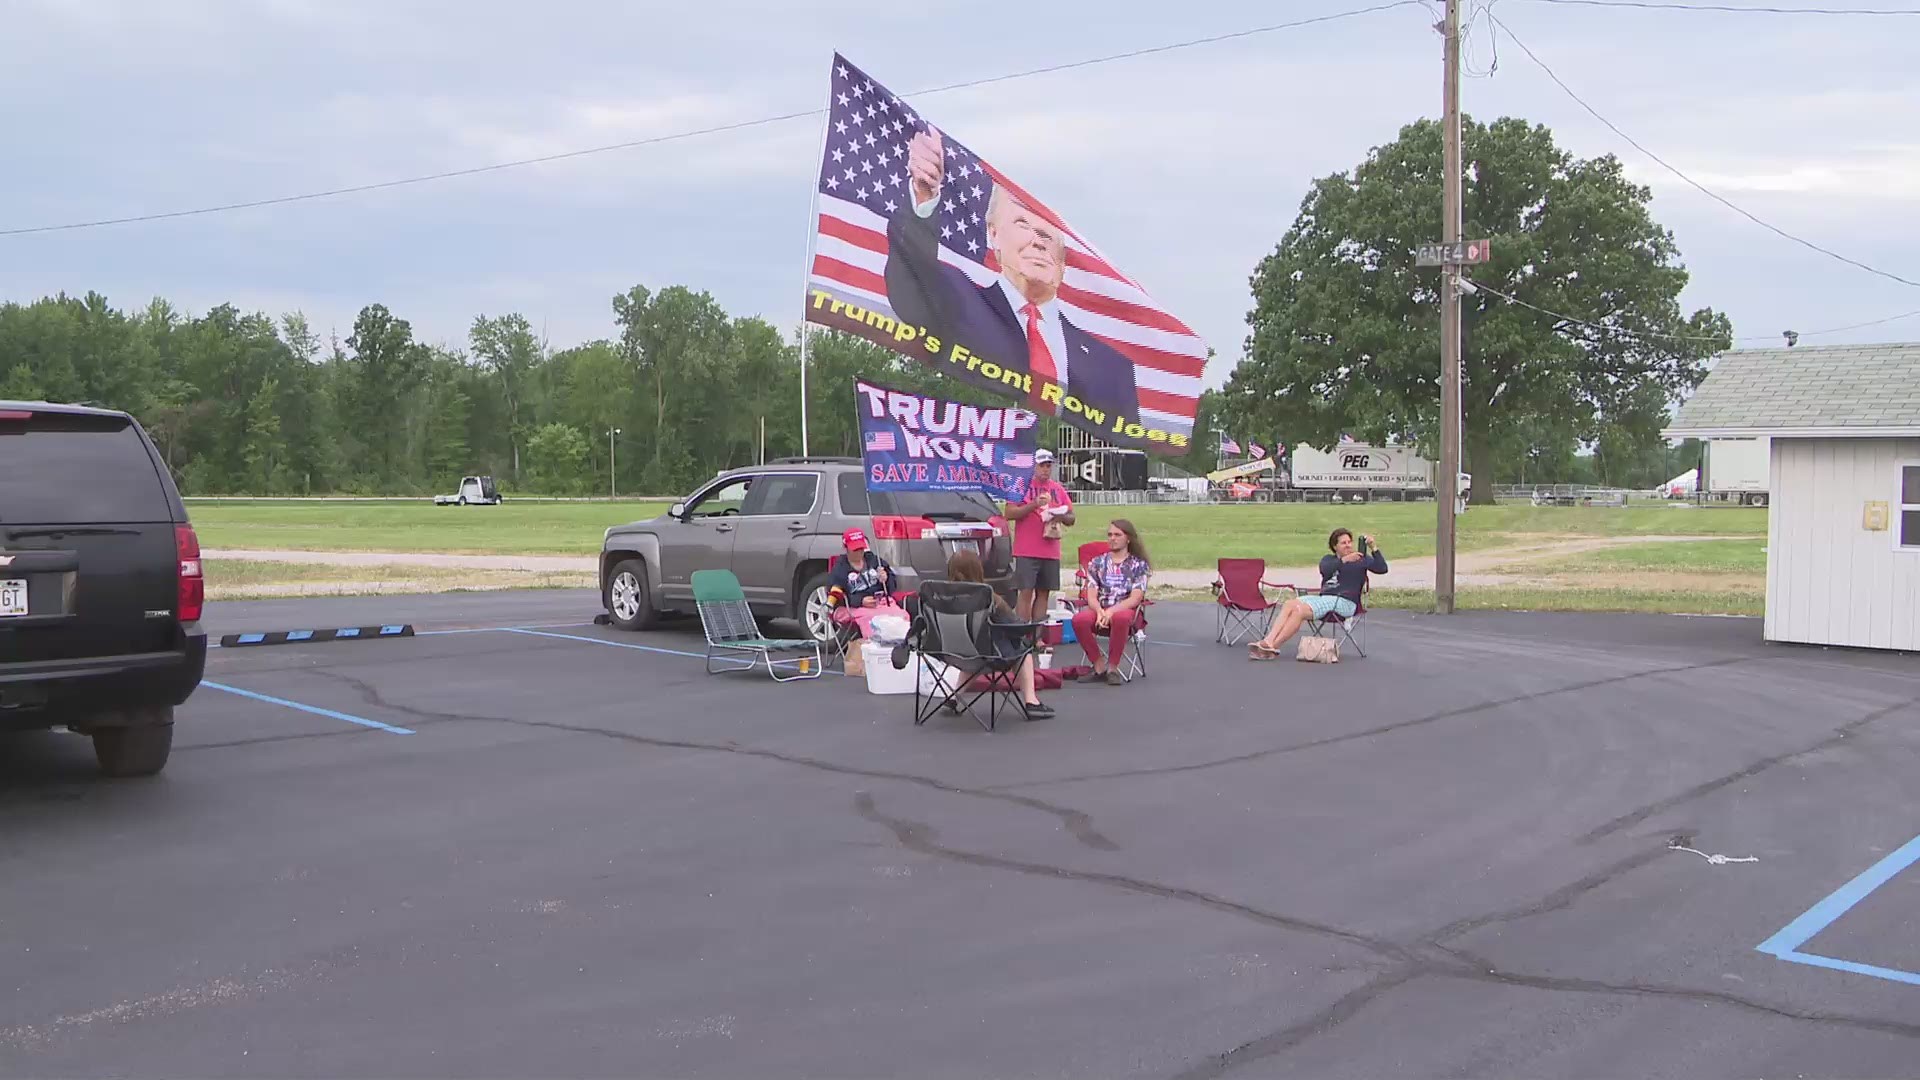 Trump is expected to make his first appearance in Ohio on June 26 with a "Save America Rally" in Lorain County.